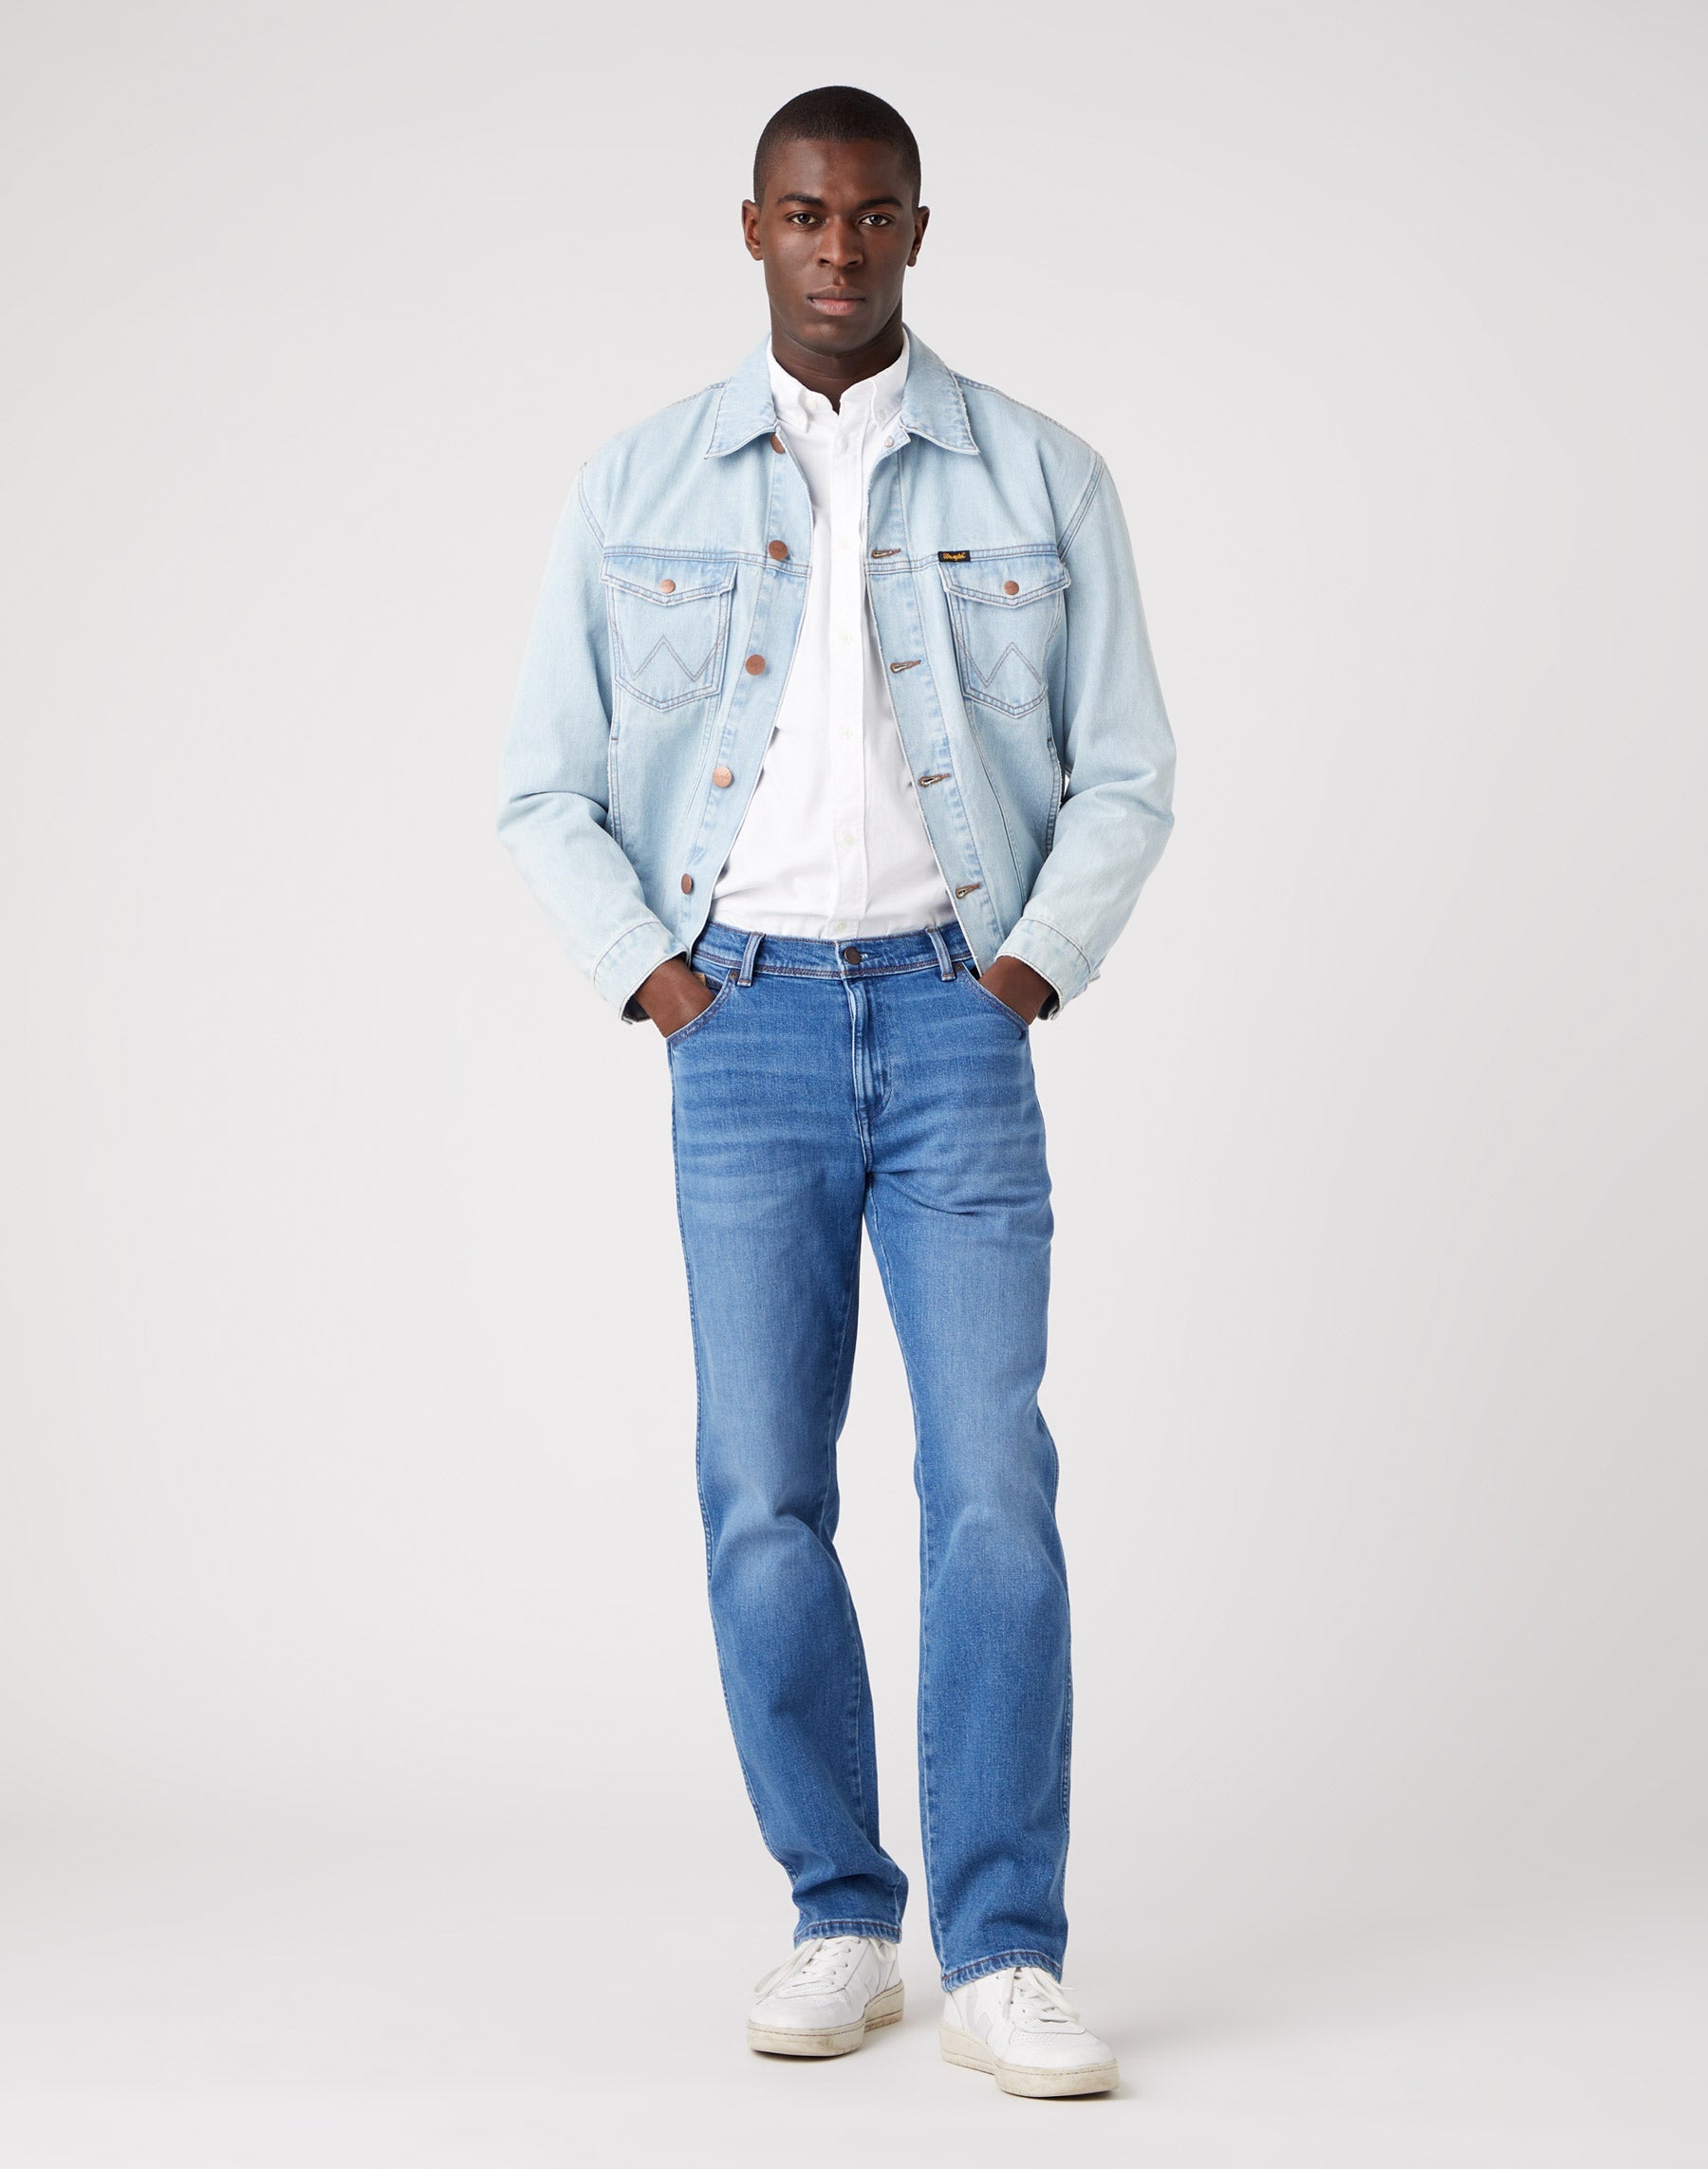 Texas Low Stretch in New Favorite Jeans Wrangler   